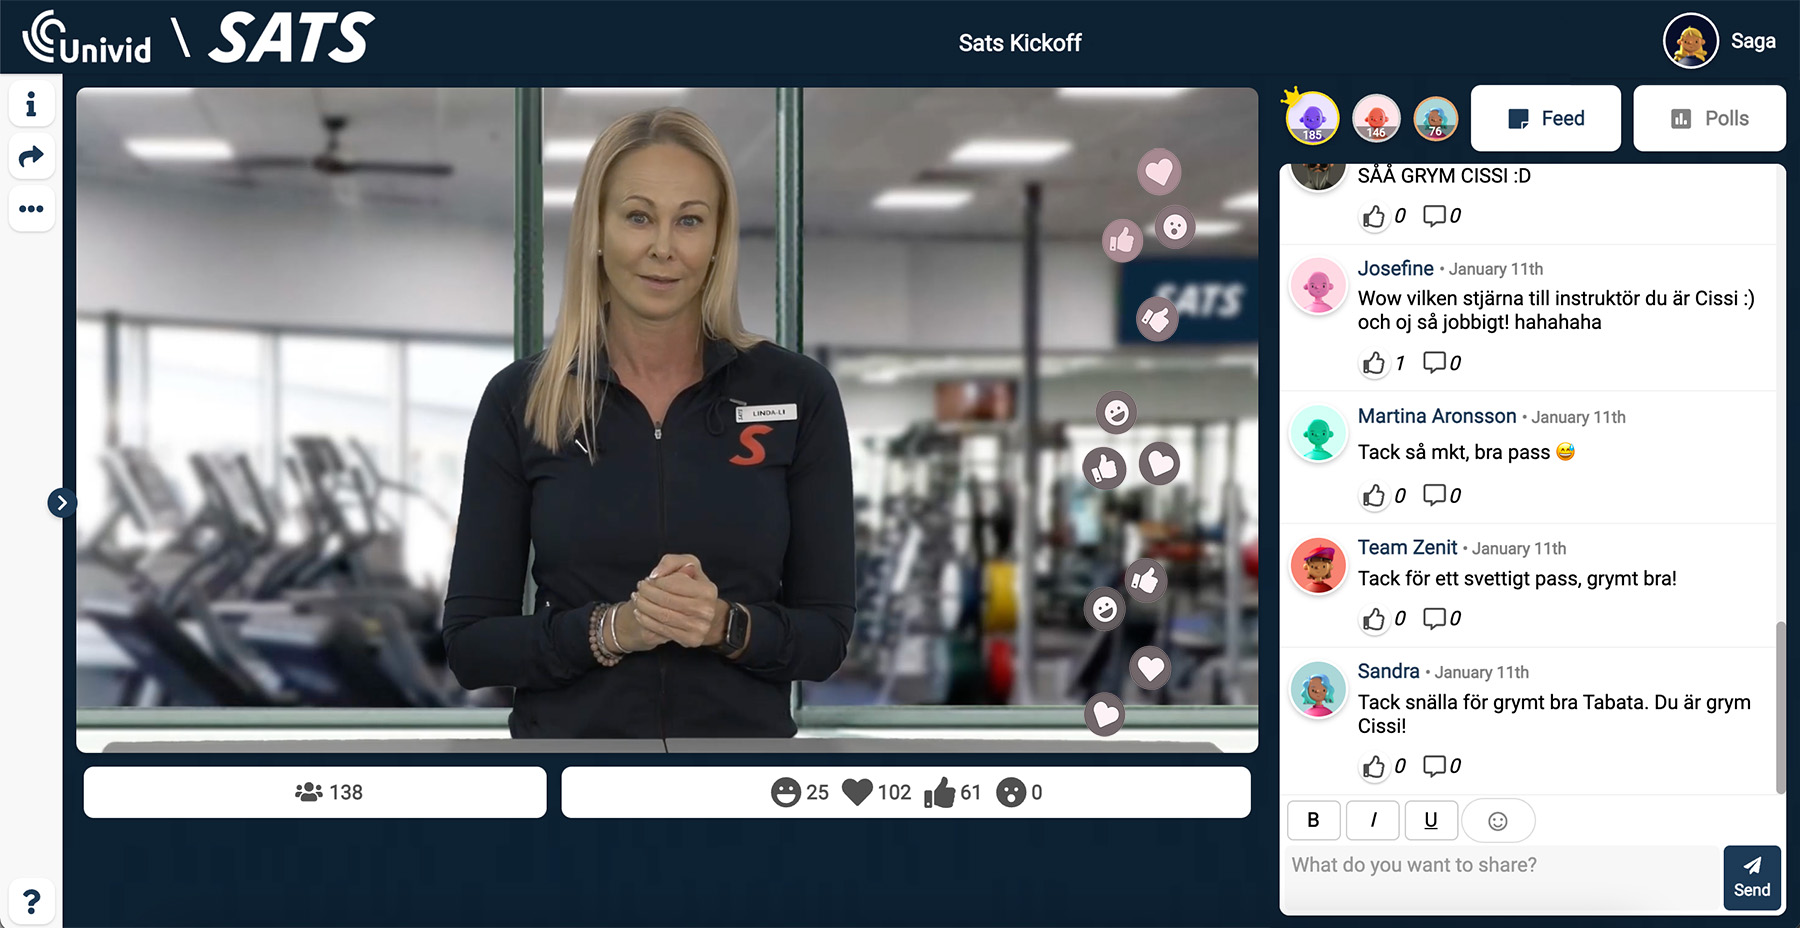 SATS kicks off the year in style on Univid, with an action-packed morning for hundreds of their awesome employees throughout Sweden. A fun and interactive digital event with live workouts, CEO speech, and a bunch of motivation!